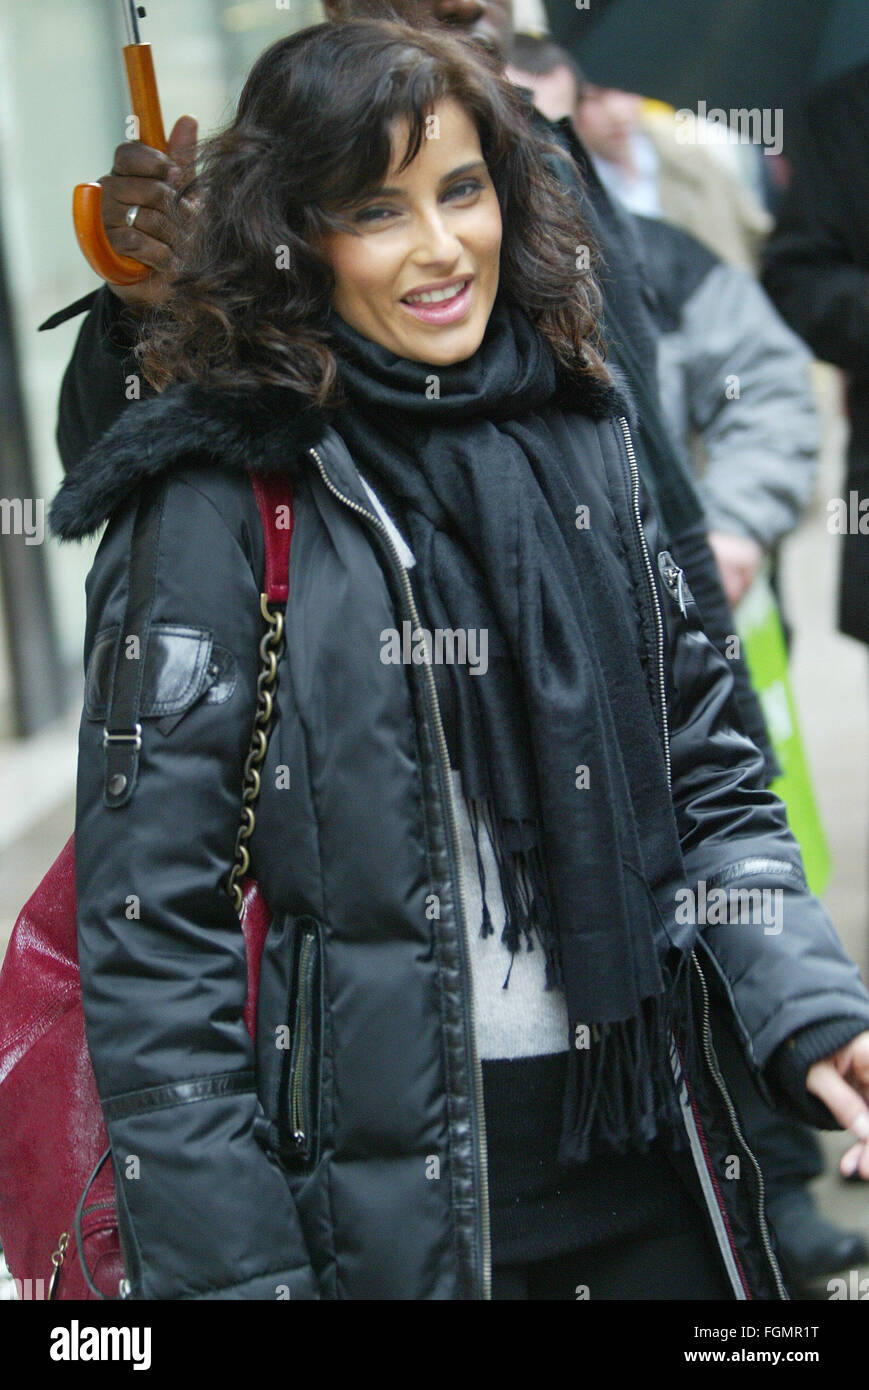 Nelly Furtado Pictured in The London Rain (credit image © Jack Ludlam) Stock Photo